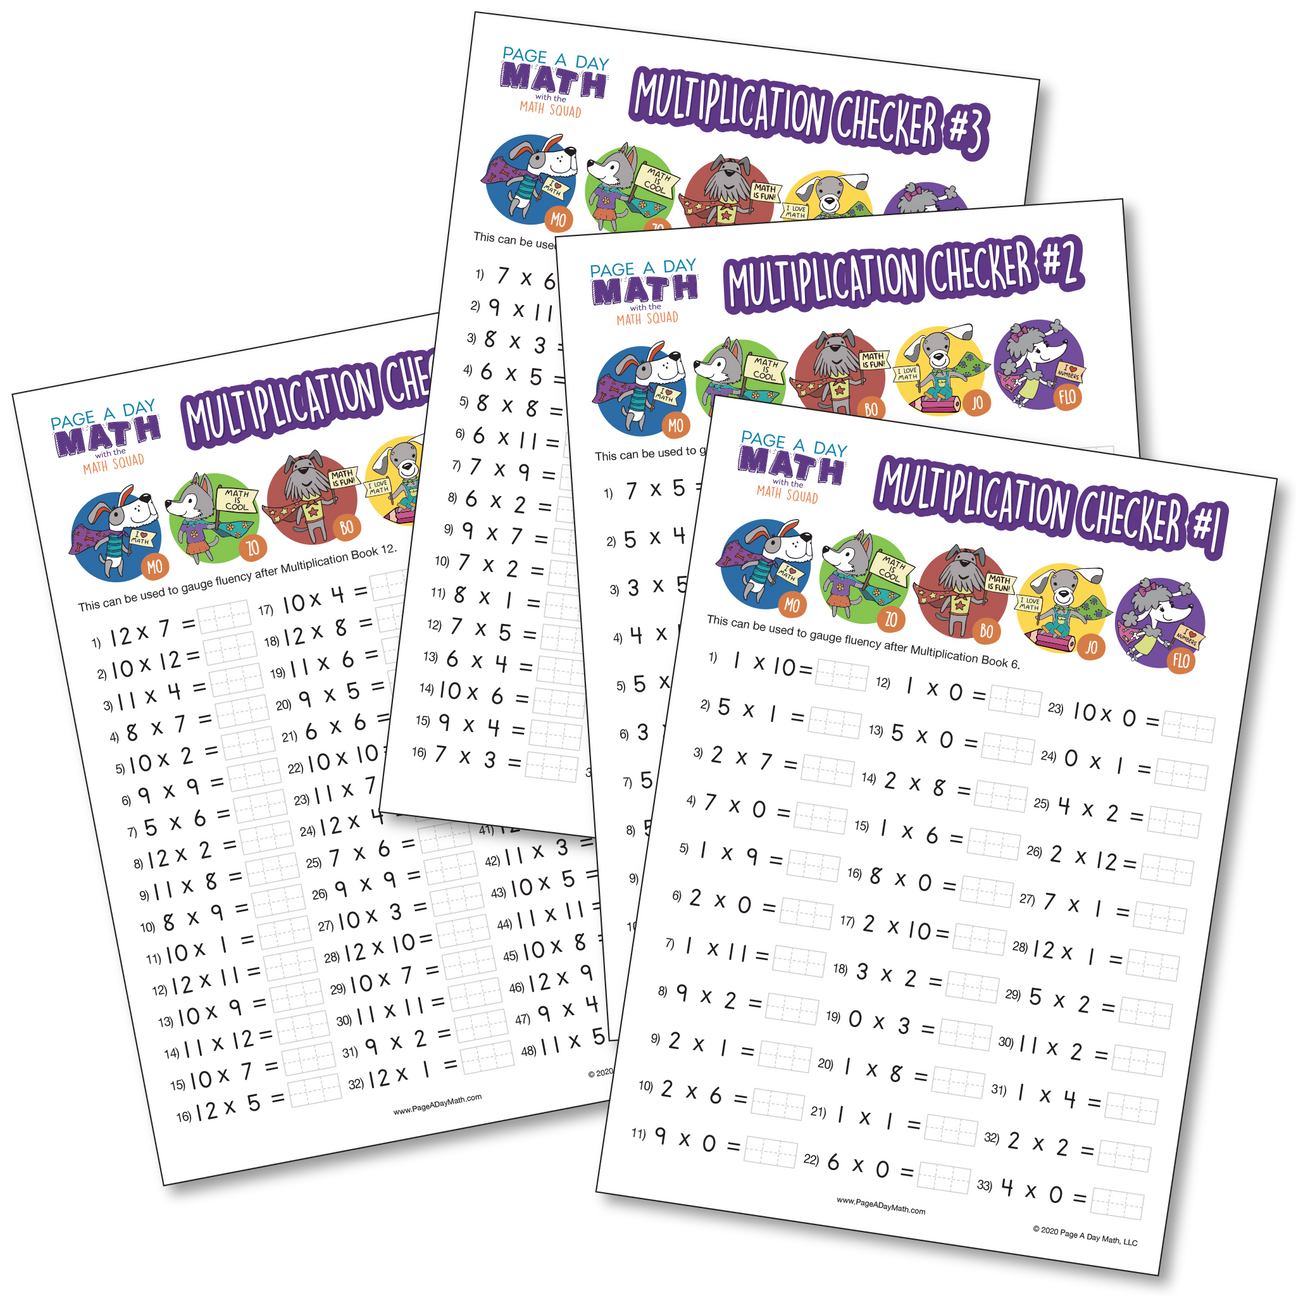  Multiplication Assessments 4 Printable Multiplication Assessment Tests PDF Page A Day Math